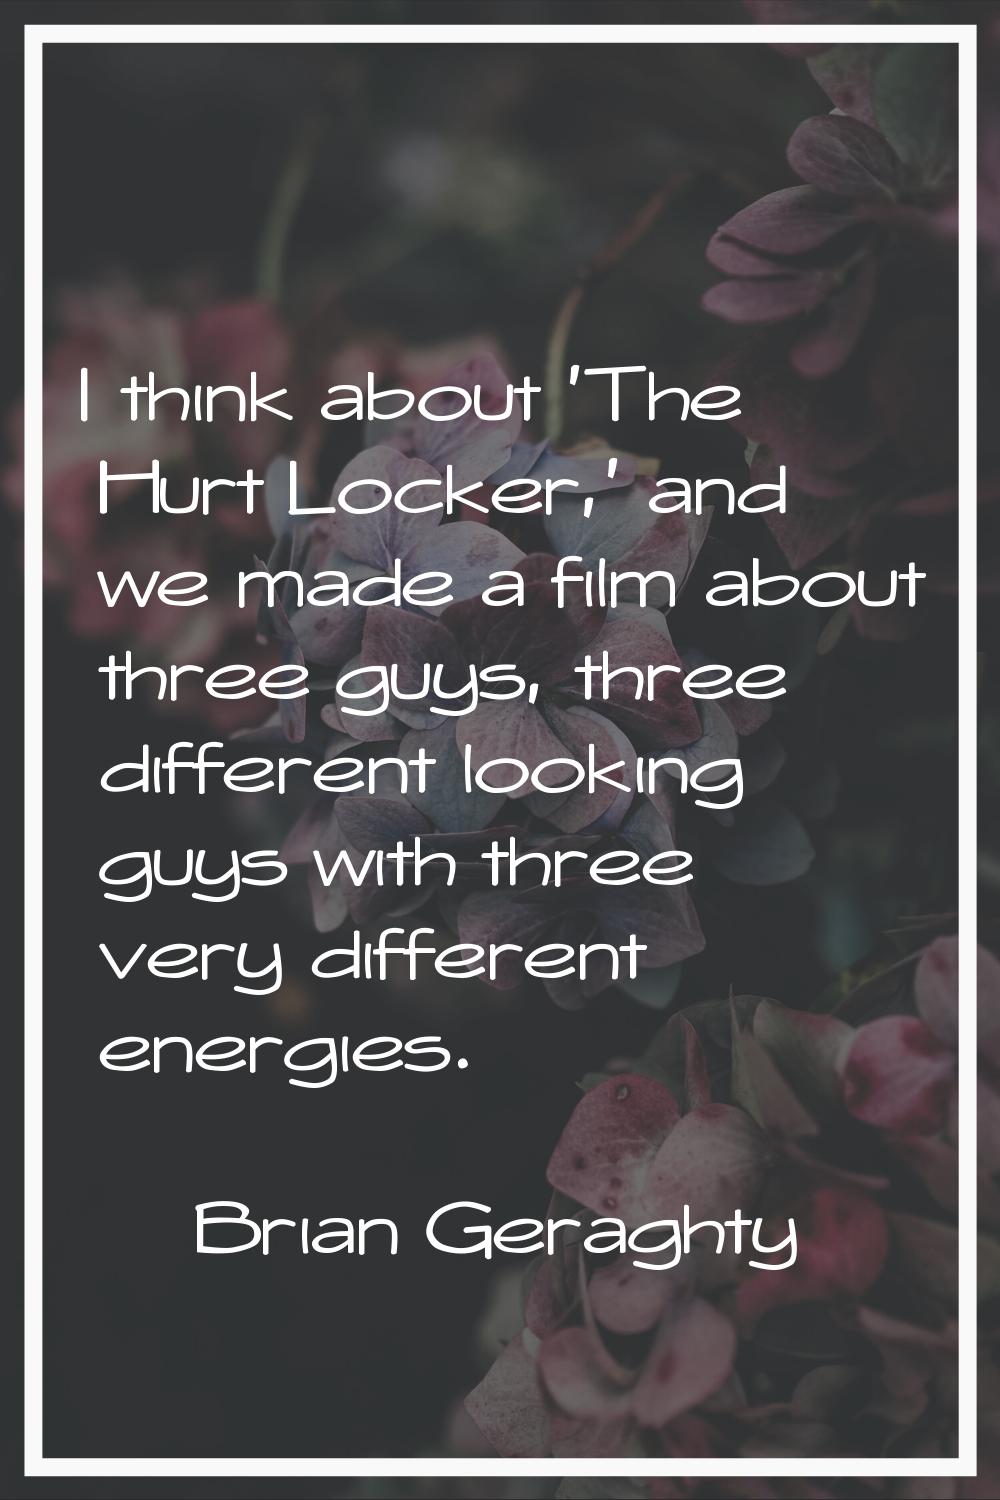 I think about 'The Hurt Locker,' and we made a film about three guys, three different looking guys 